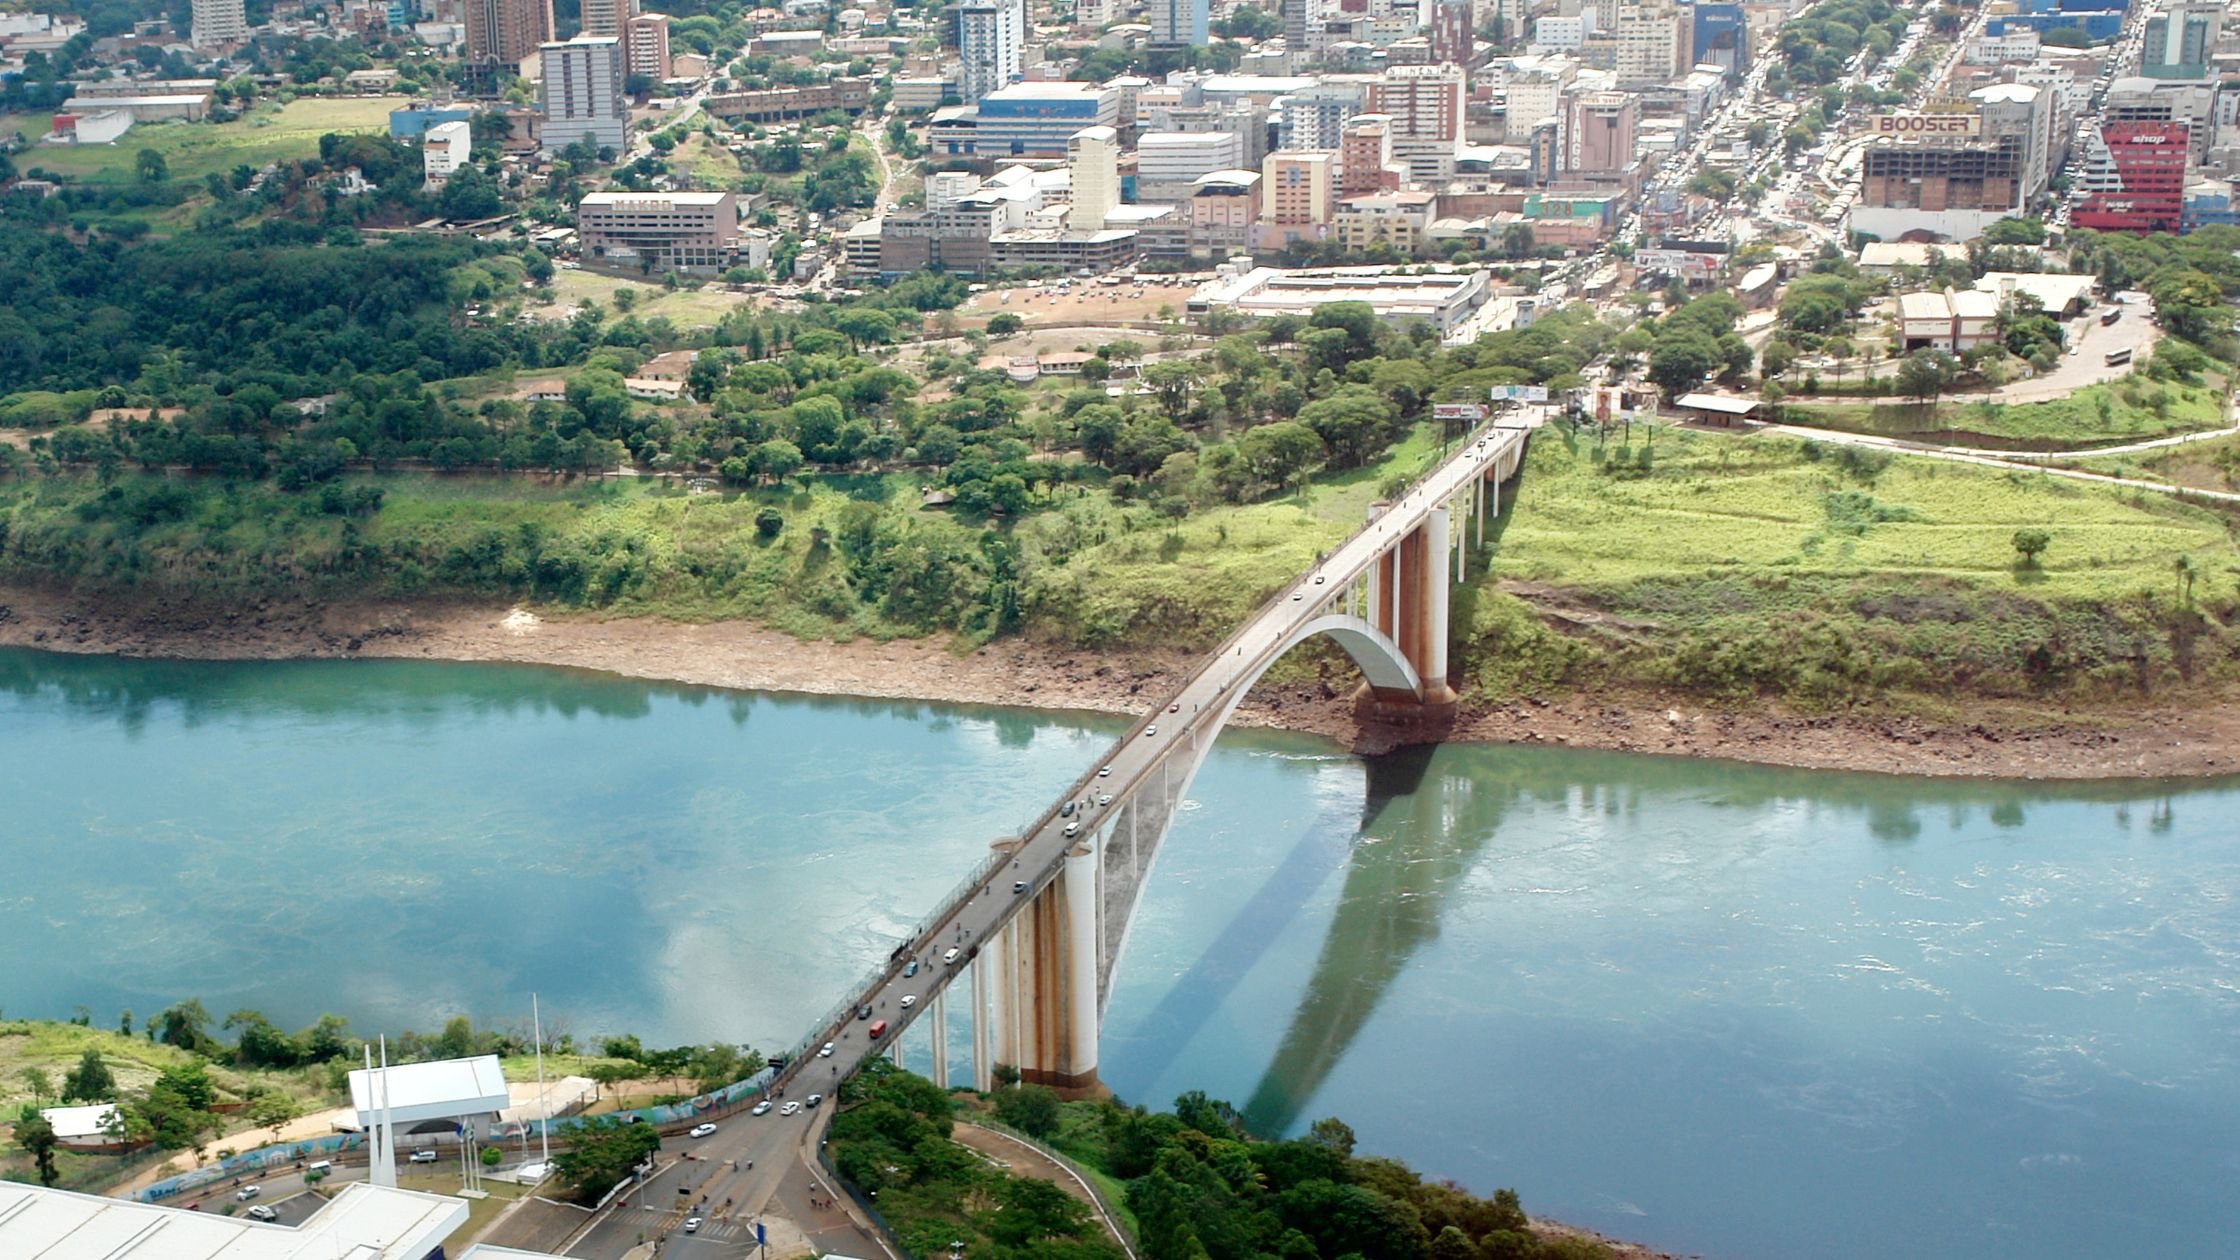 The International Friendship Bridge that connects Brazil and Paraguay